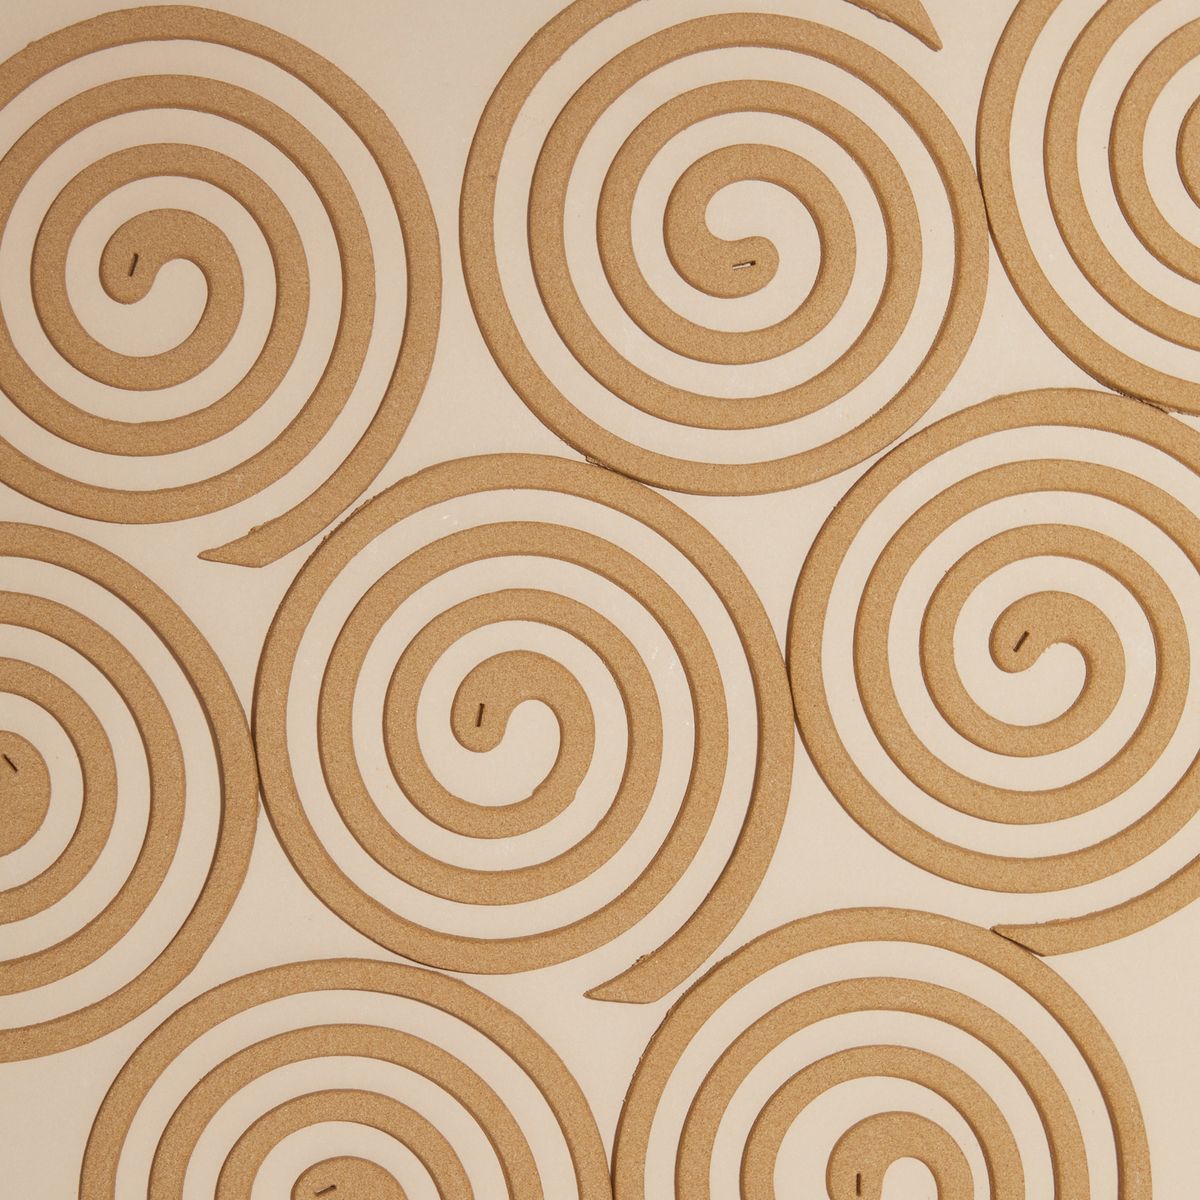 multiple coils in a circle